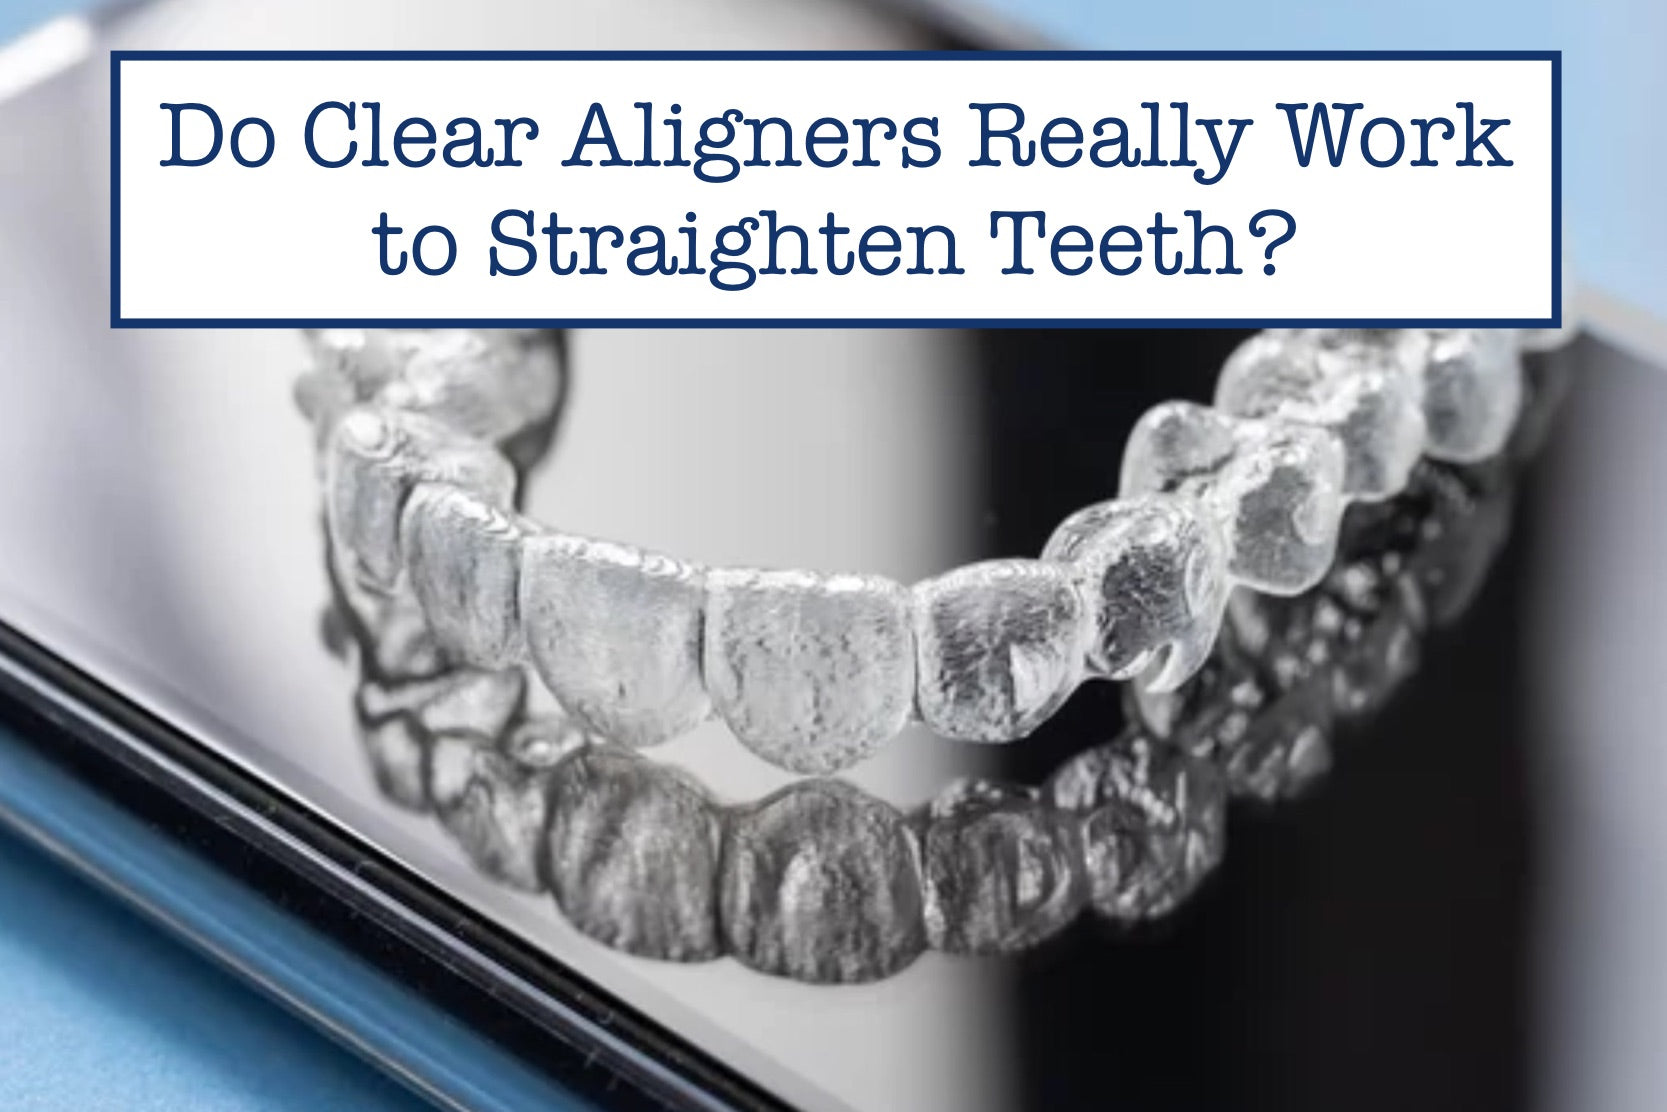 Do Clear Aligners Really Work to Straighten Teeth?